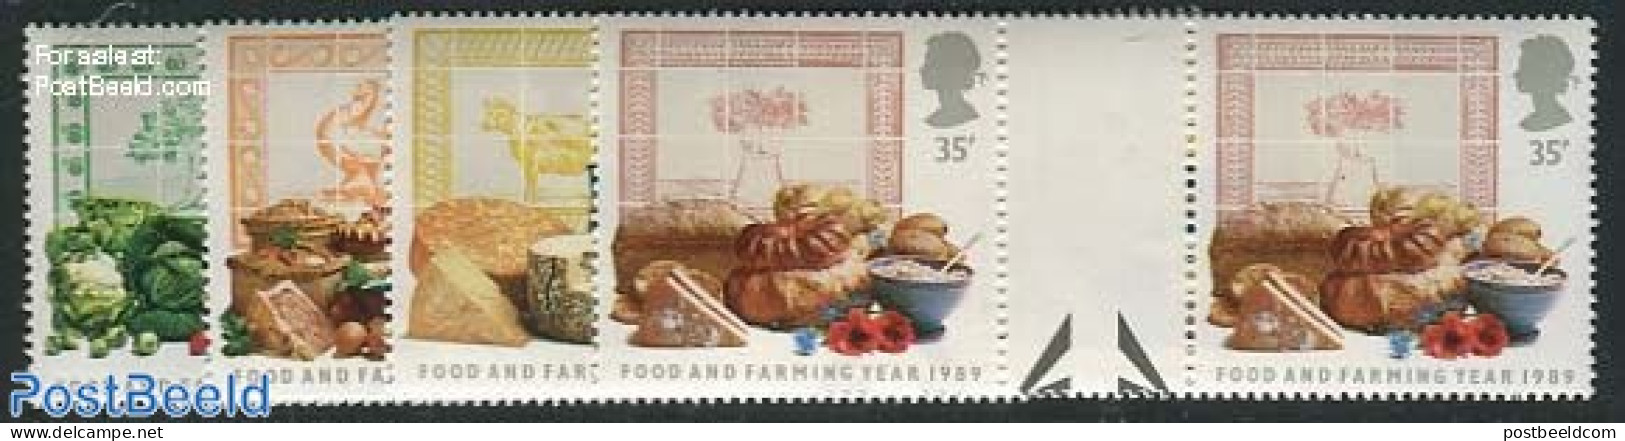 Great Britain 1989 Food And Farming Year 4v, Gutter Pairs, Mint NH, Health - Bread & Baking - Food & Drink - Neufs